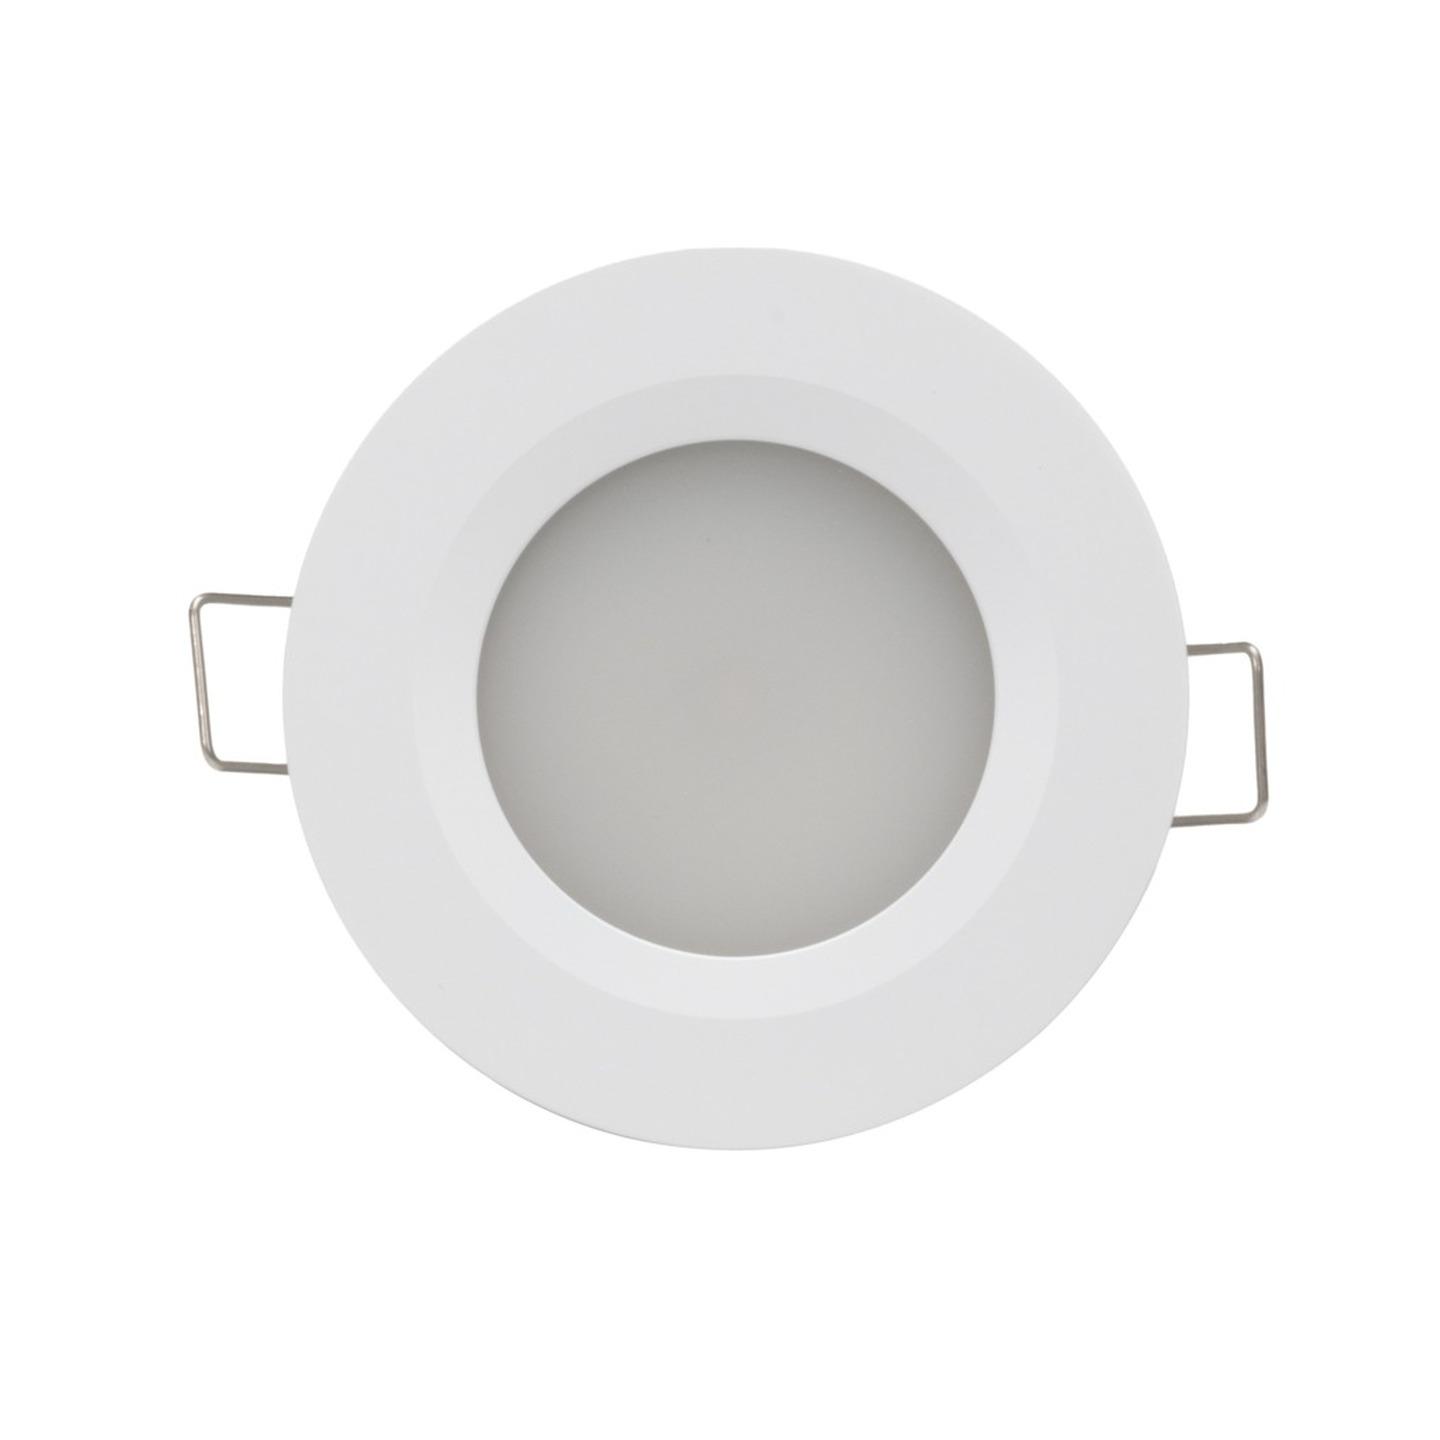 2W 11-16VDC Cool White LED Downlight with Push Button Diffuser White